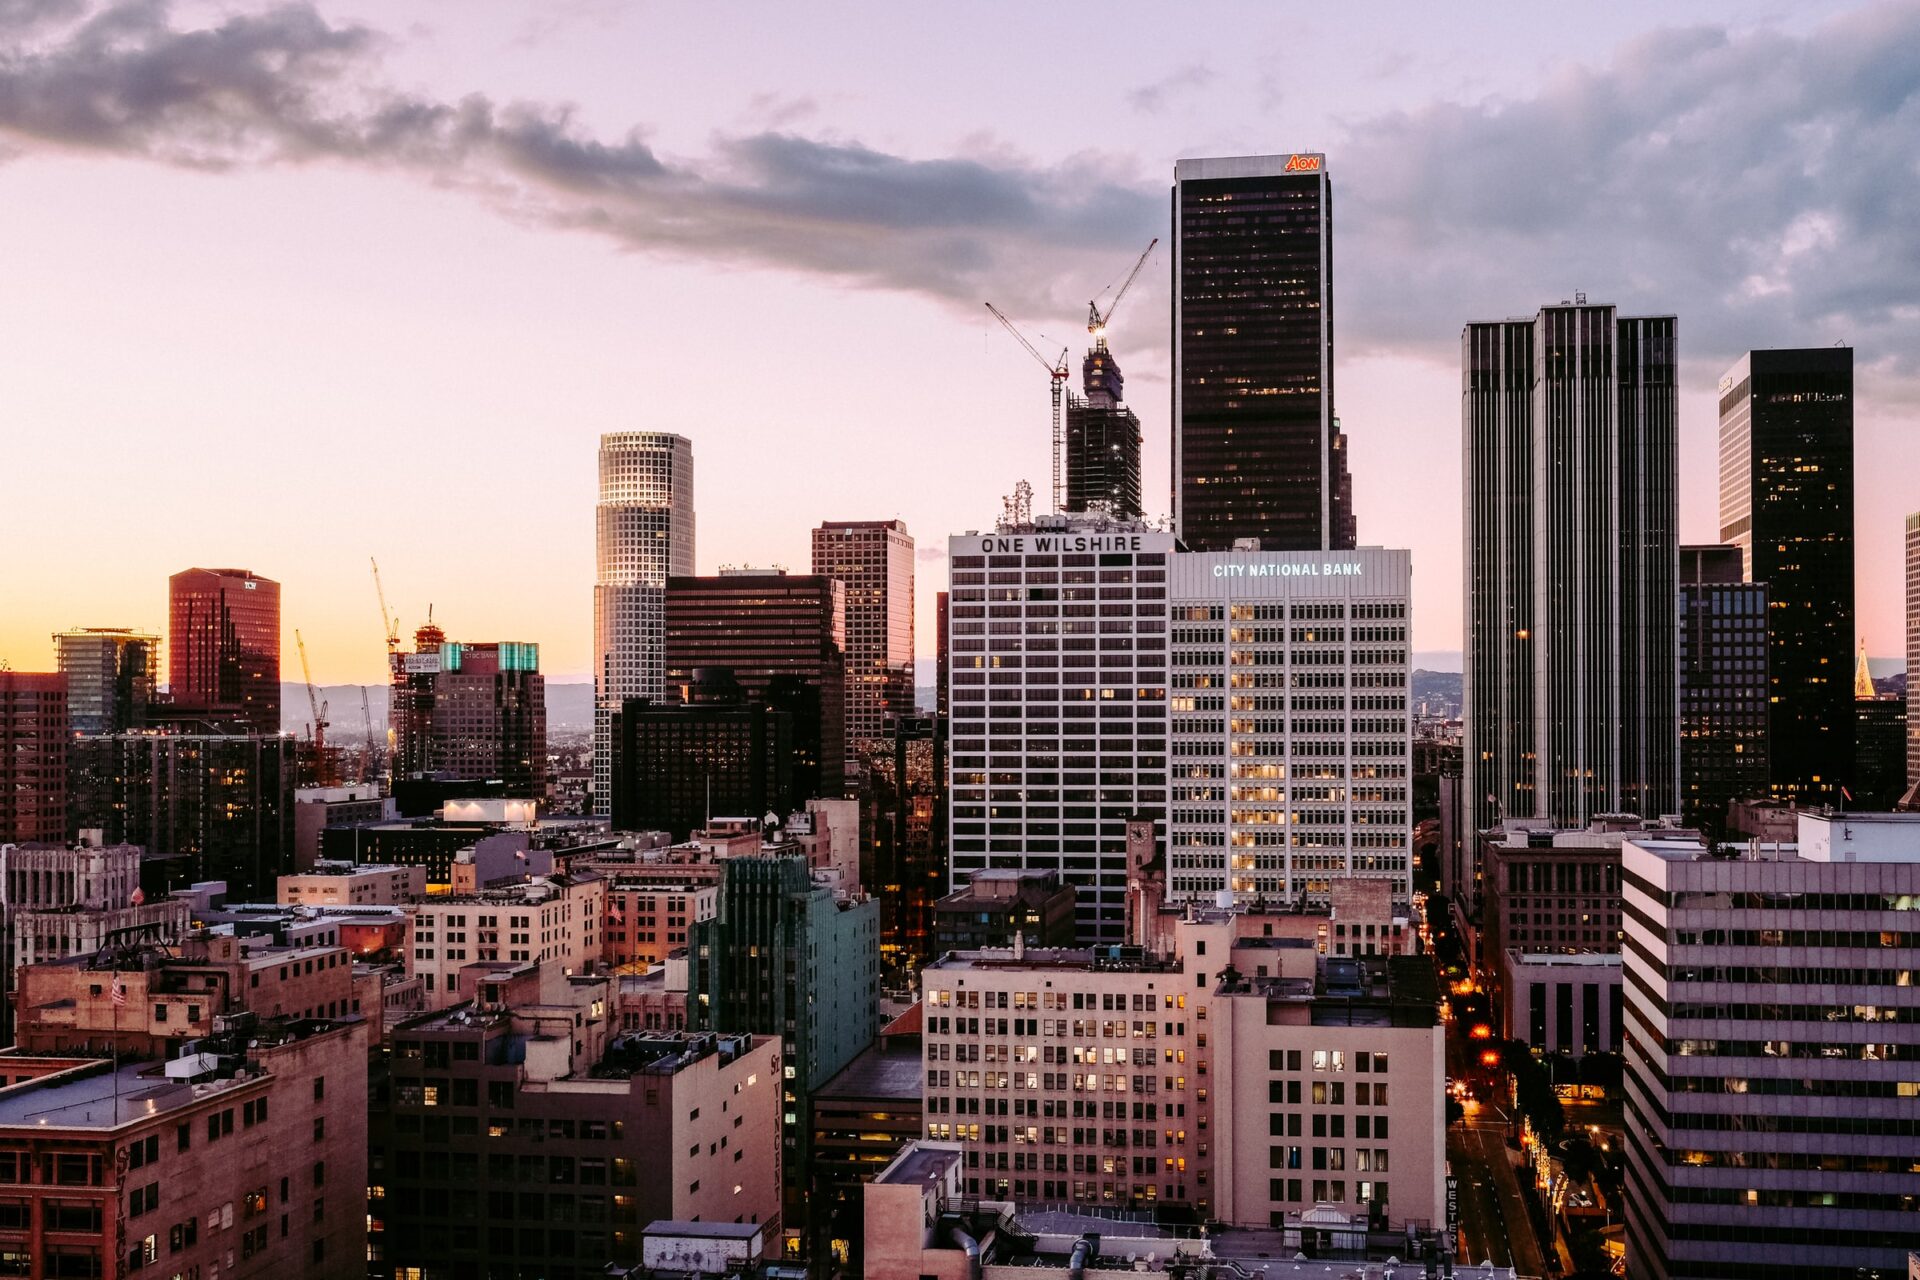 Image of Los Angeles downtown